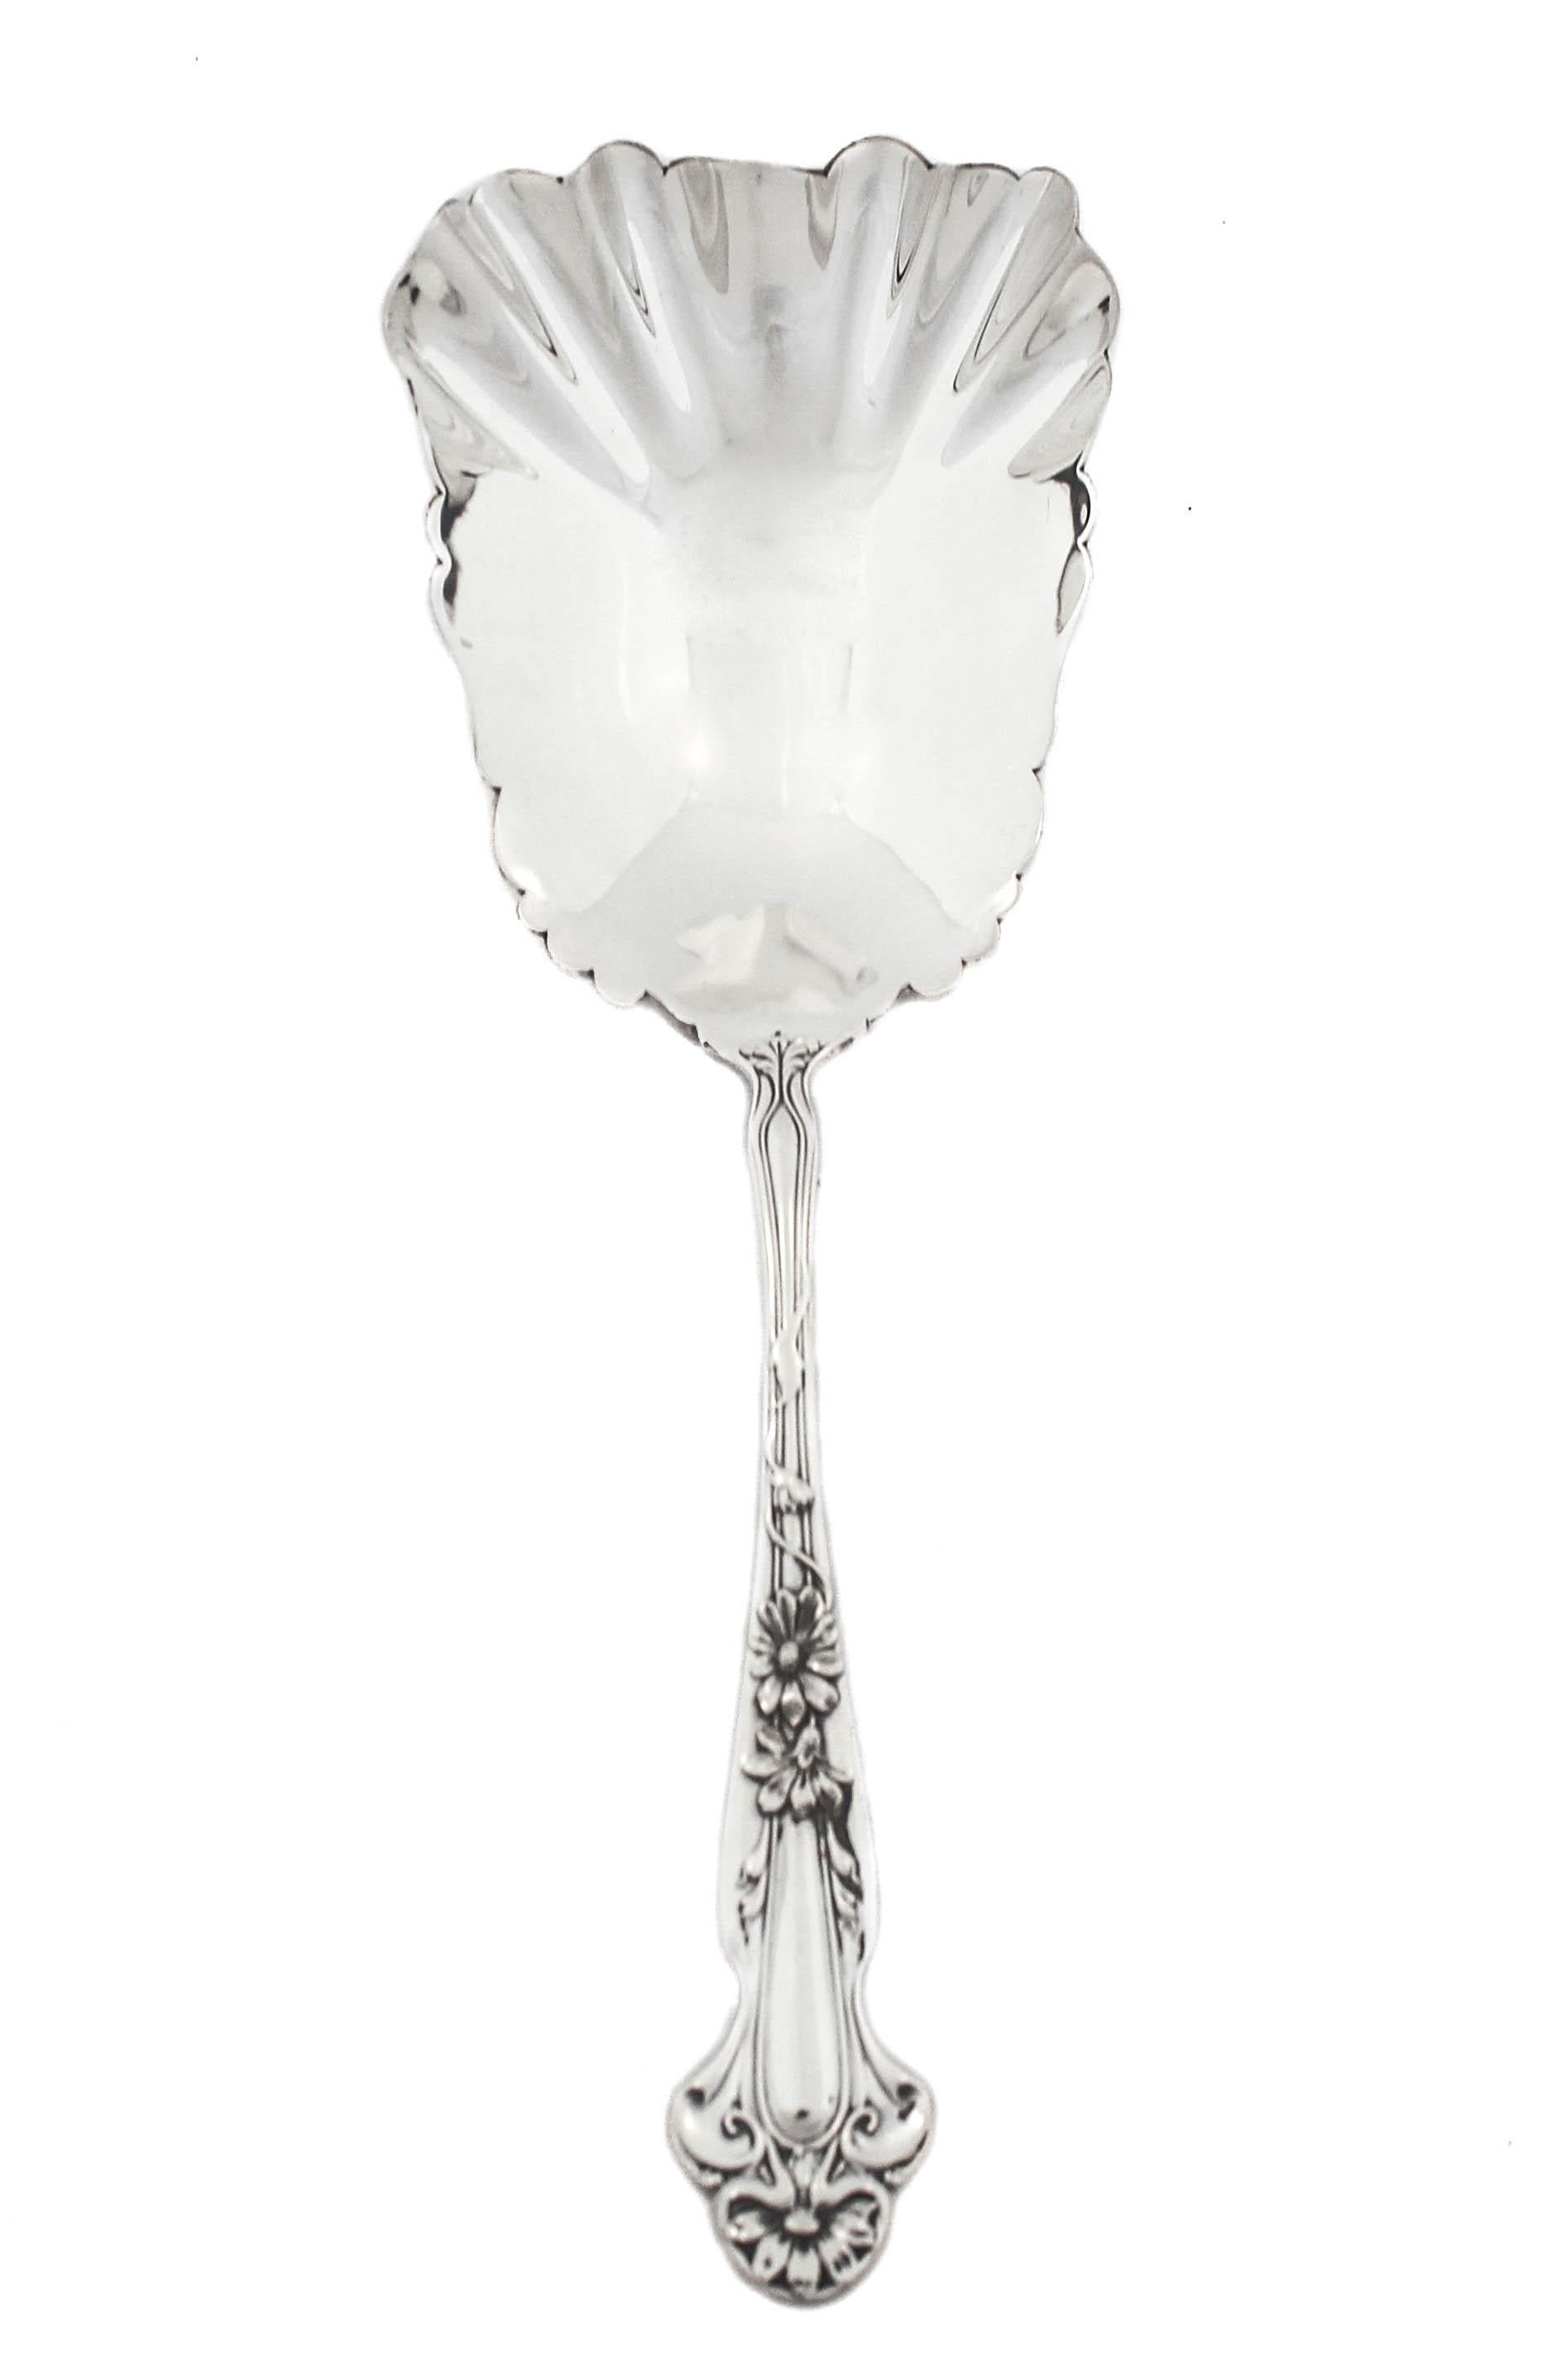 Being offered is an exquisite pair of sterling silver Art Nouveau (extra large) serving spoons by R. Blackington of Massachusetts.  The handles have blossoming flowers and vines wrapping around the handles.  Even the shape is quintessential Art